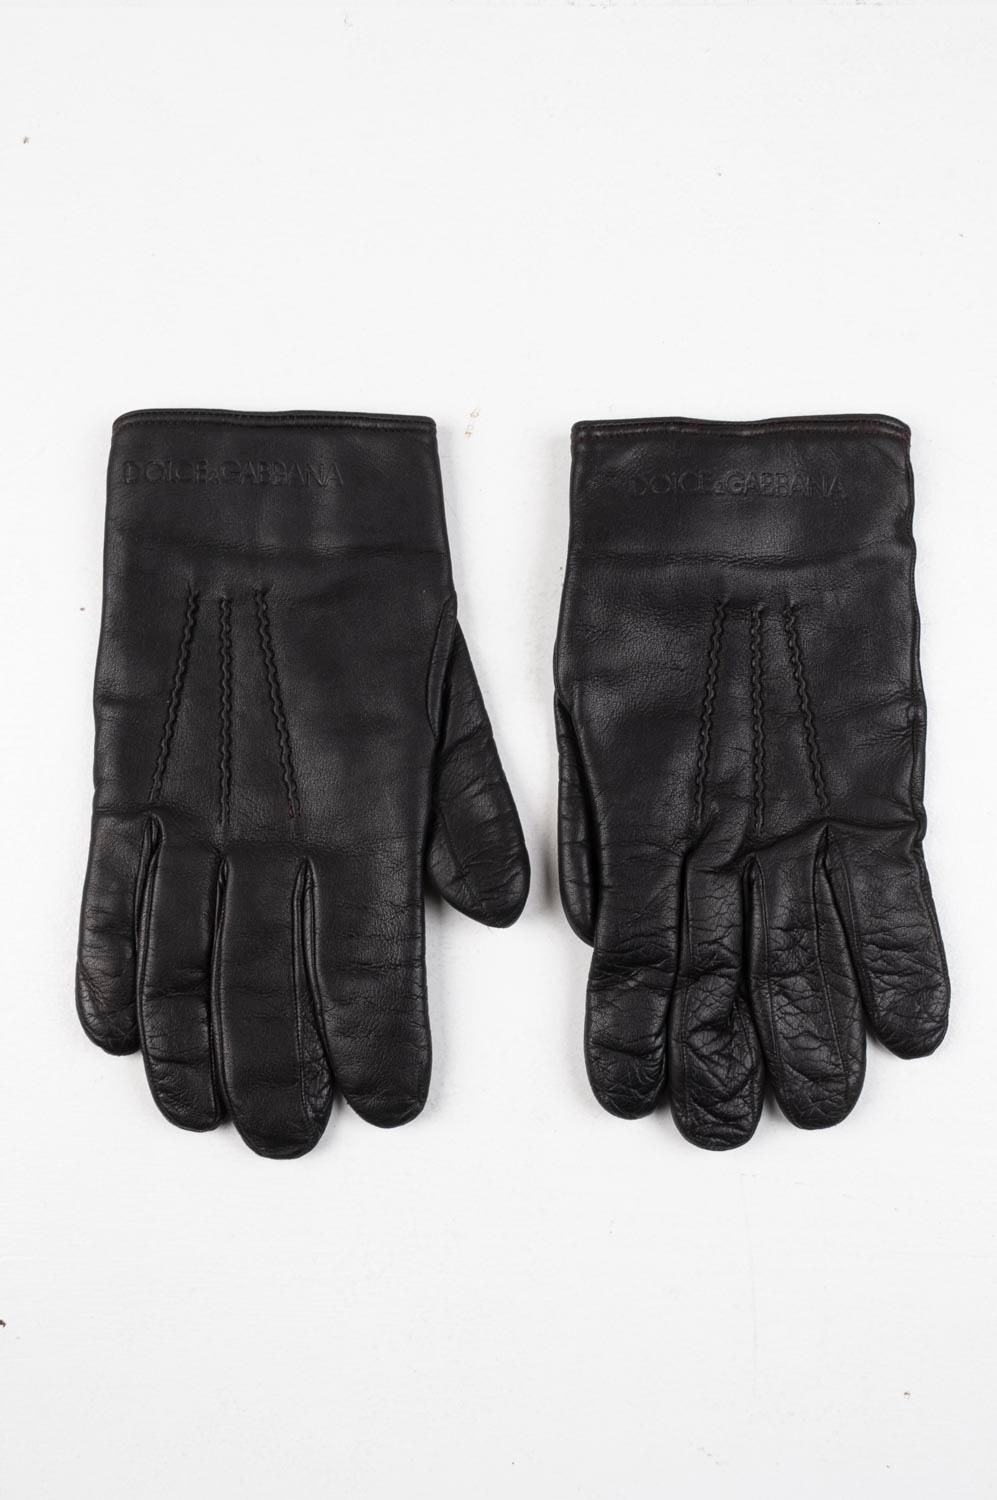 Item for sale is 100% genuine Dolce&Gabbana Leather Men Gloves, S335
Color: Brown
(An actual color may a bit vary due to individual computer screen interpretation)
Material: Genuine leather
Tag size: 8.5
These gloves are great quality item. Rate 9